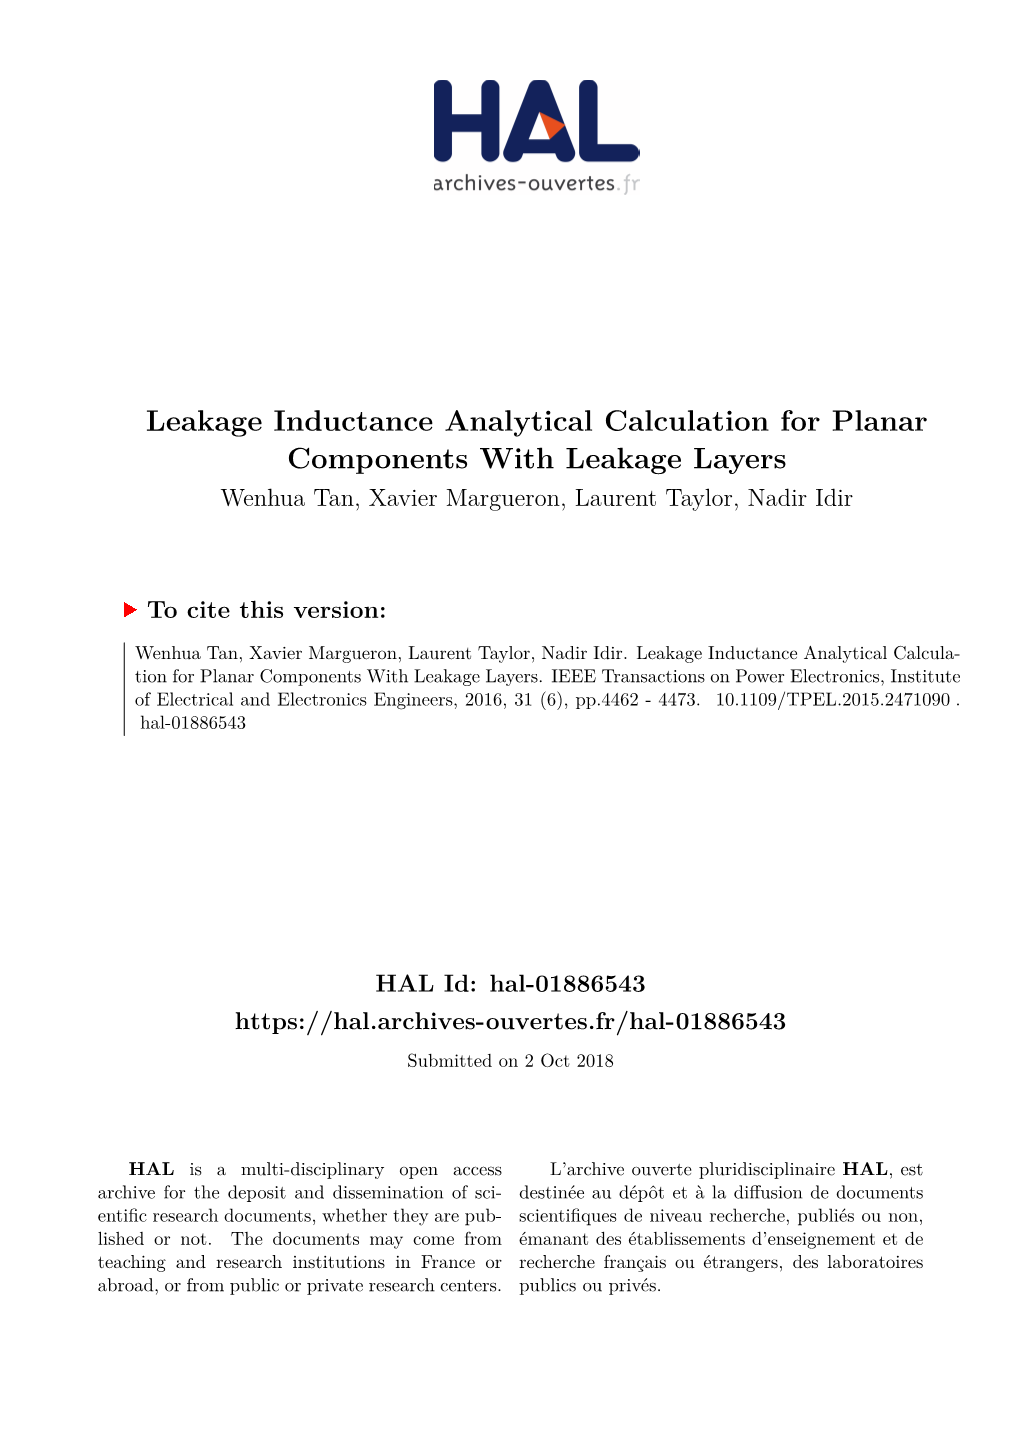 Leakage Inductance Analytical Calculation for Planar Components with Leakage Layers Wenhua Tan, Xavier Margueron, Laurent Taylor, Nadir Idir